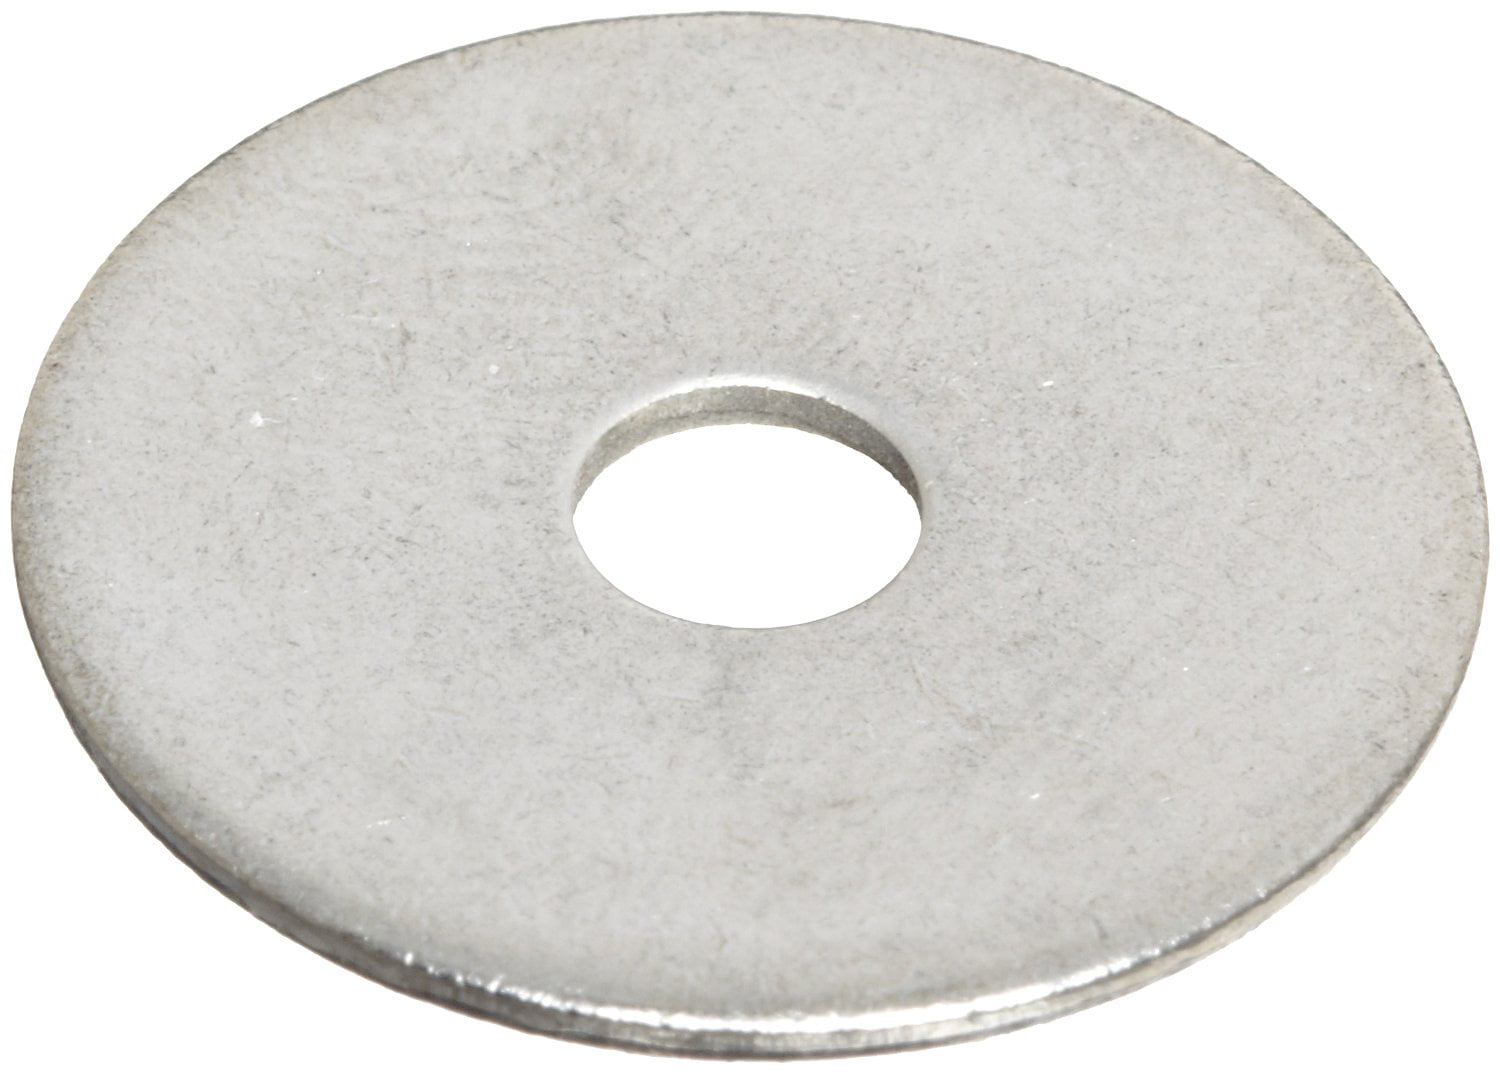 3/8 & 1/2 Stainless EXTRA THICK HEAVY DUTY Flat Washers 50 of each 1/4 5/16 